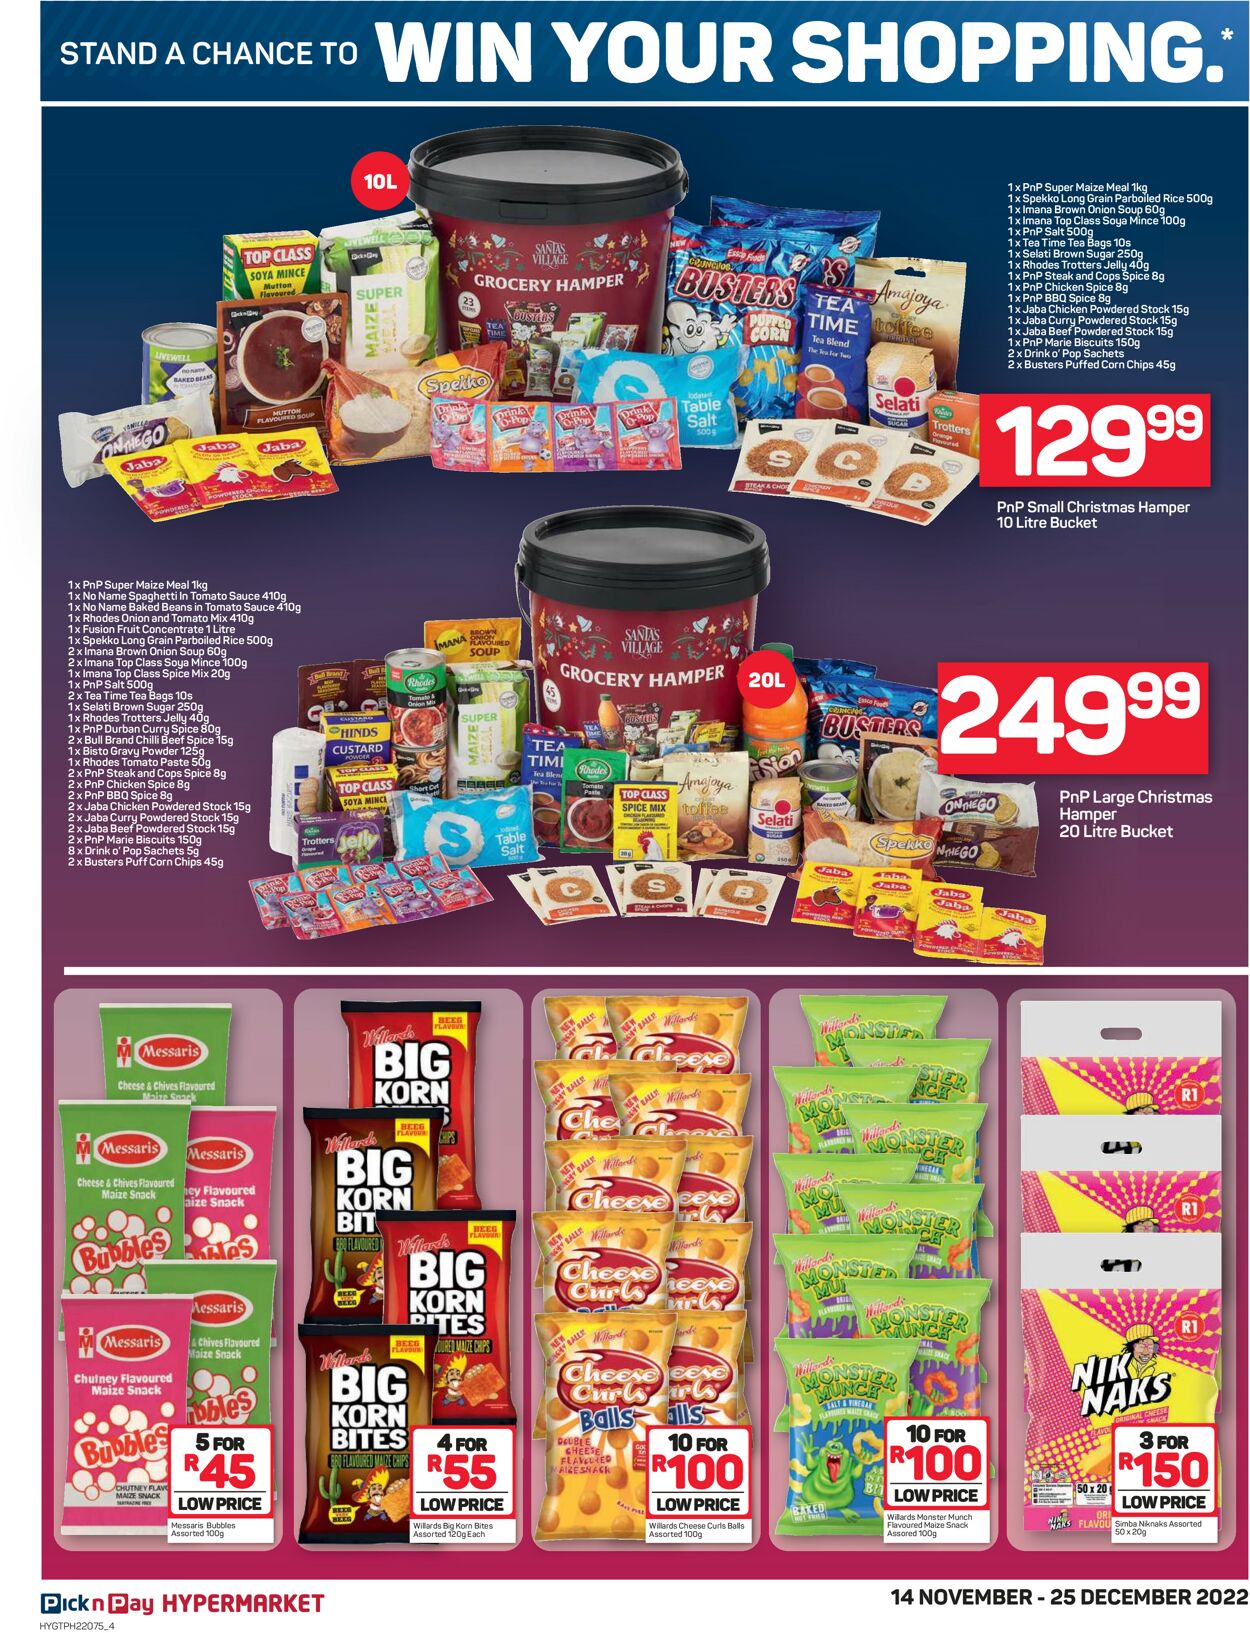 Pick n Pay Catalogue - 2022/11/13-2022/11/21 (Page 4)